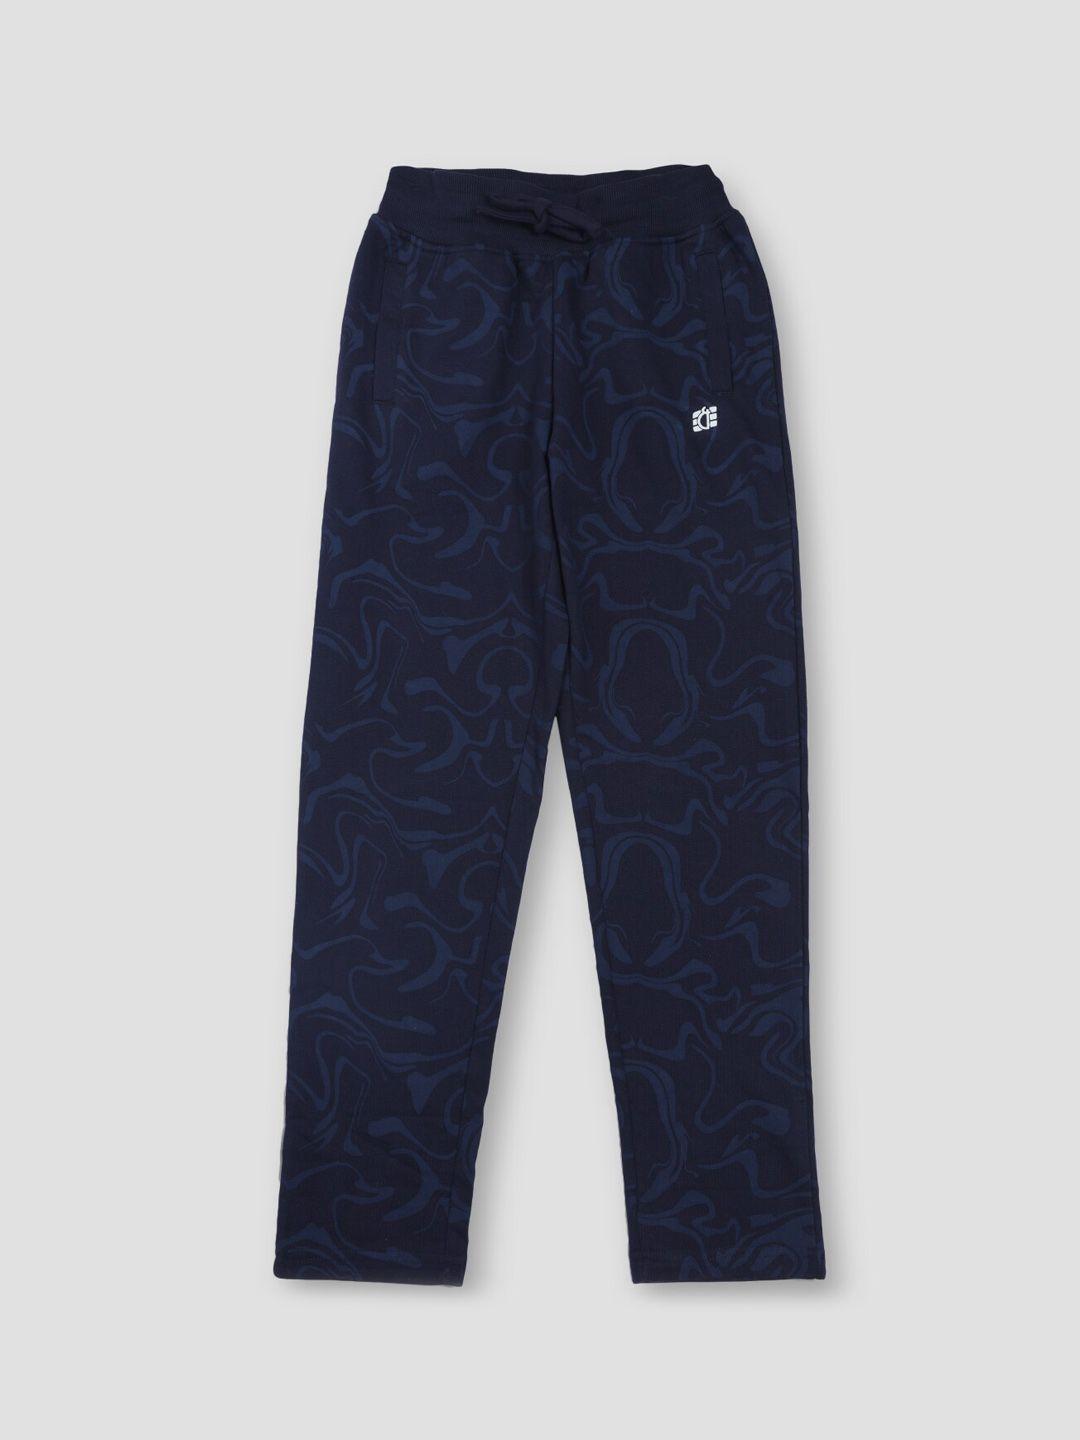 Gini and Jony Boys Navy Blue Abstract Printed Cotton Track Pants